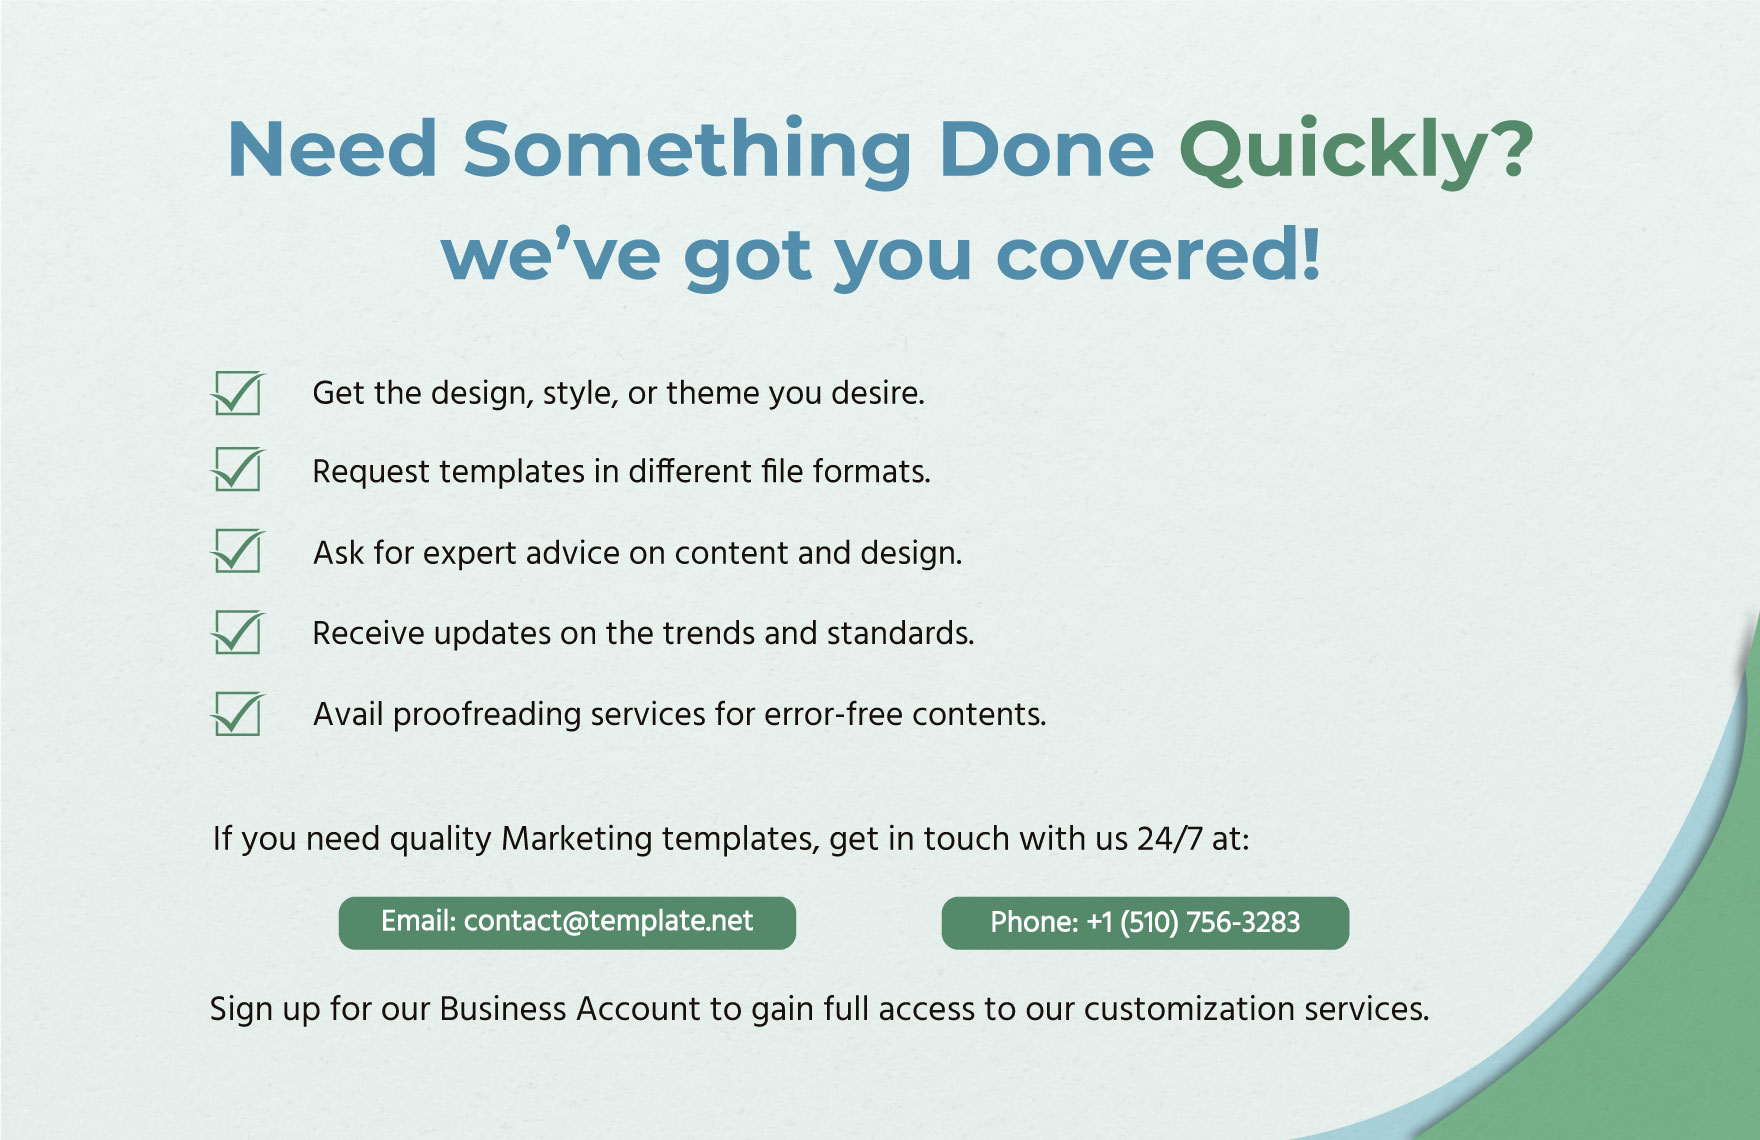 Marketing Cost per Conversion Analysis Template